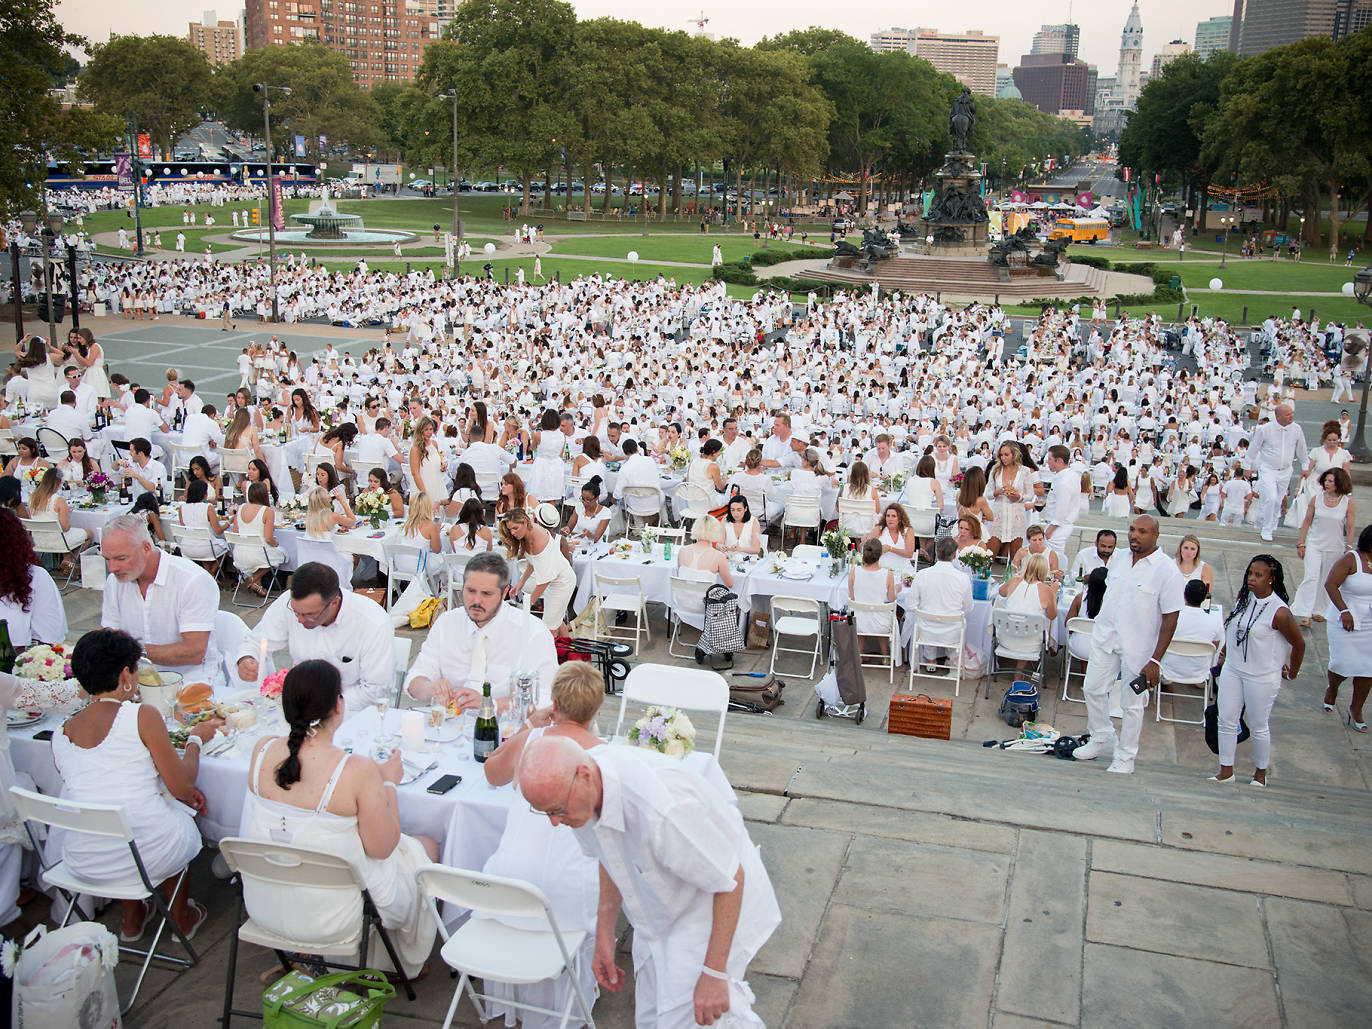 Dîner en Blanc is coming to Philadelphia, and we want to send you